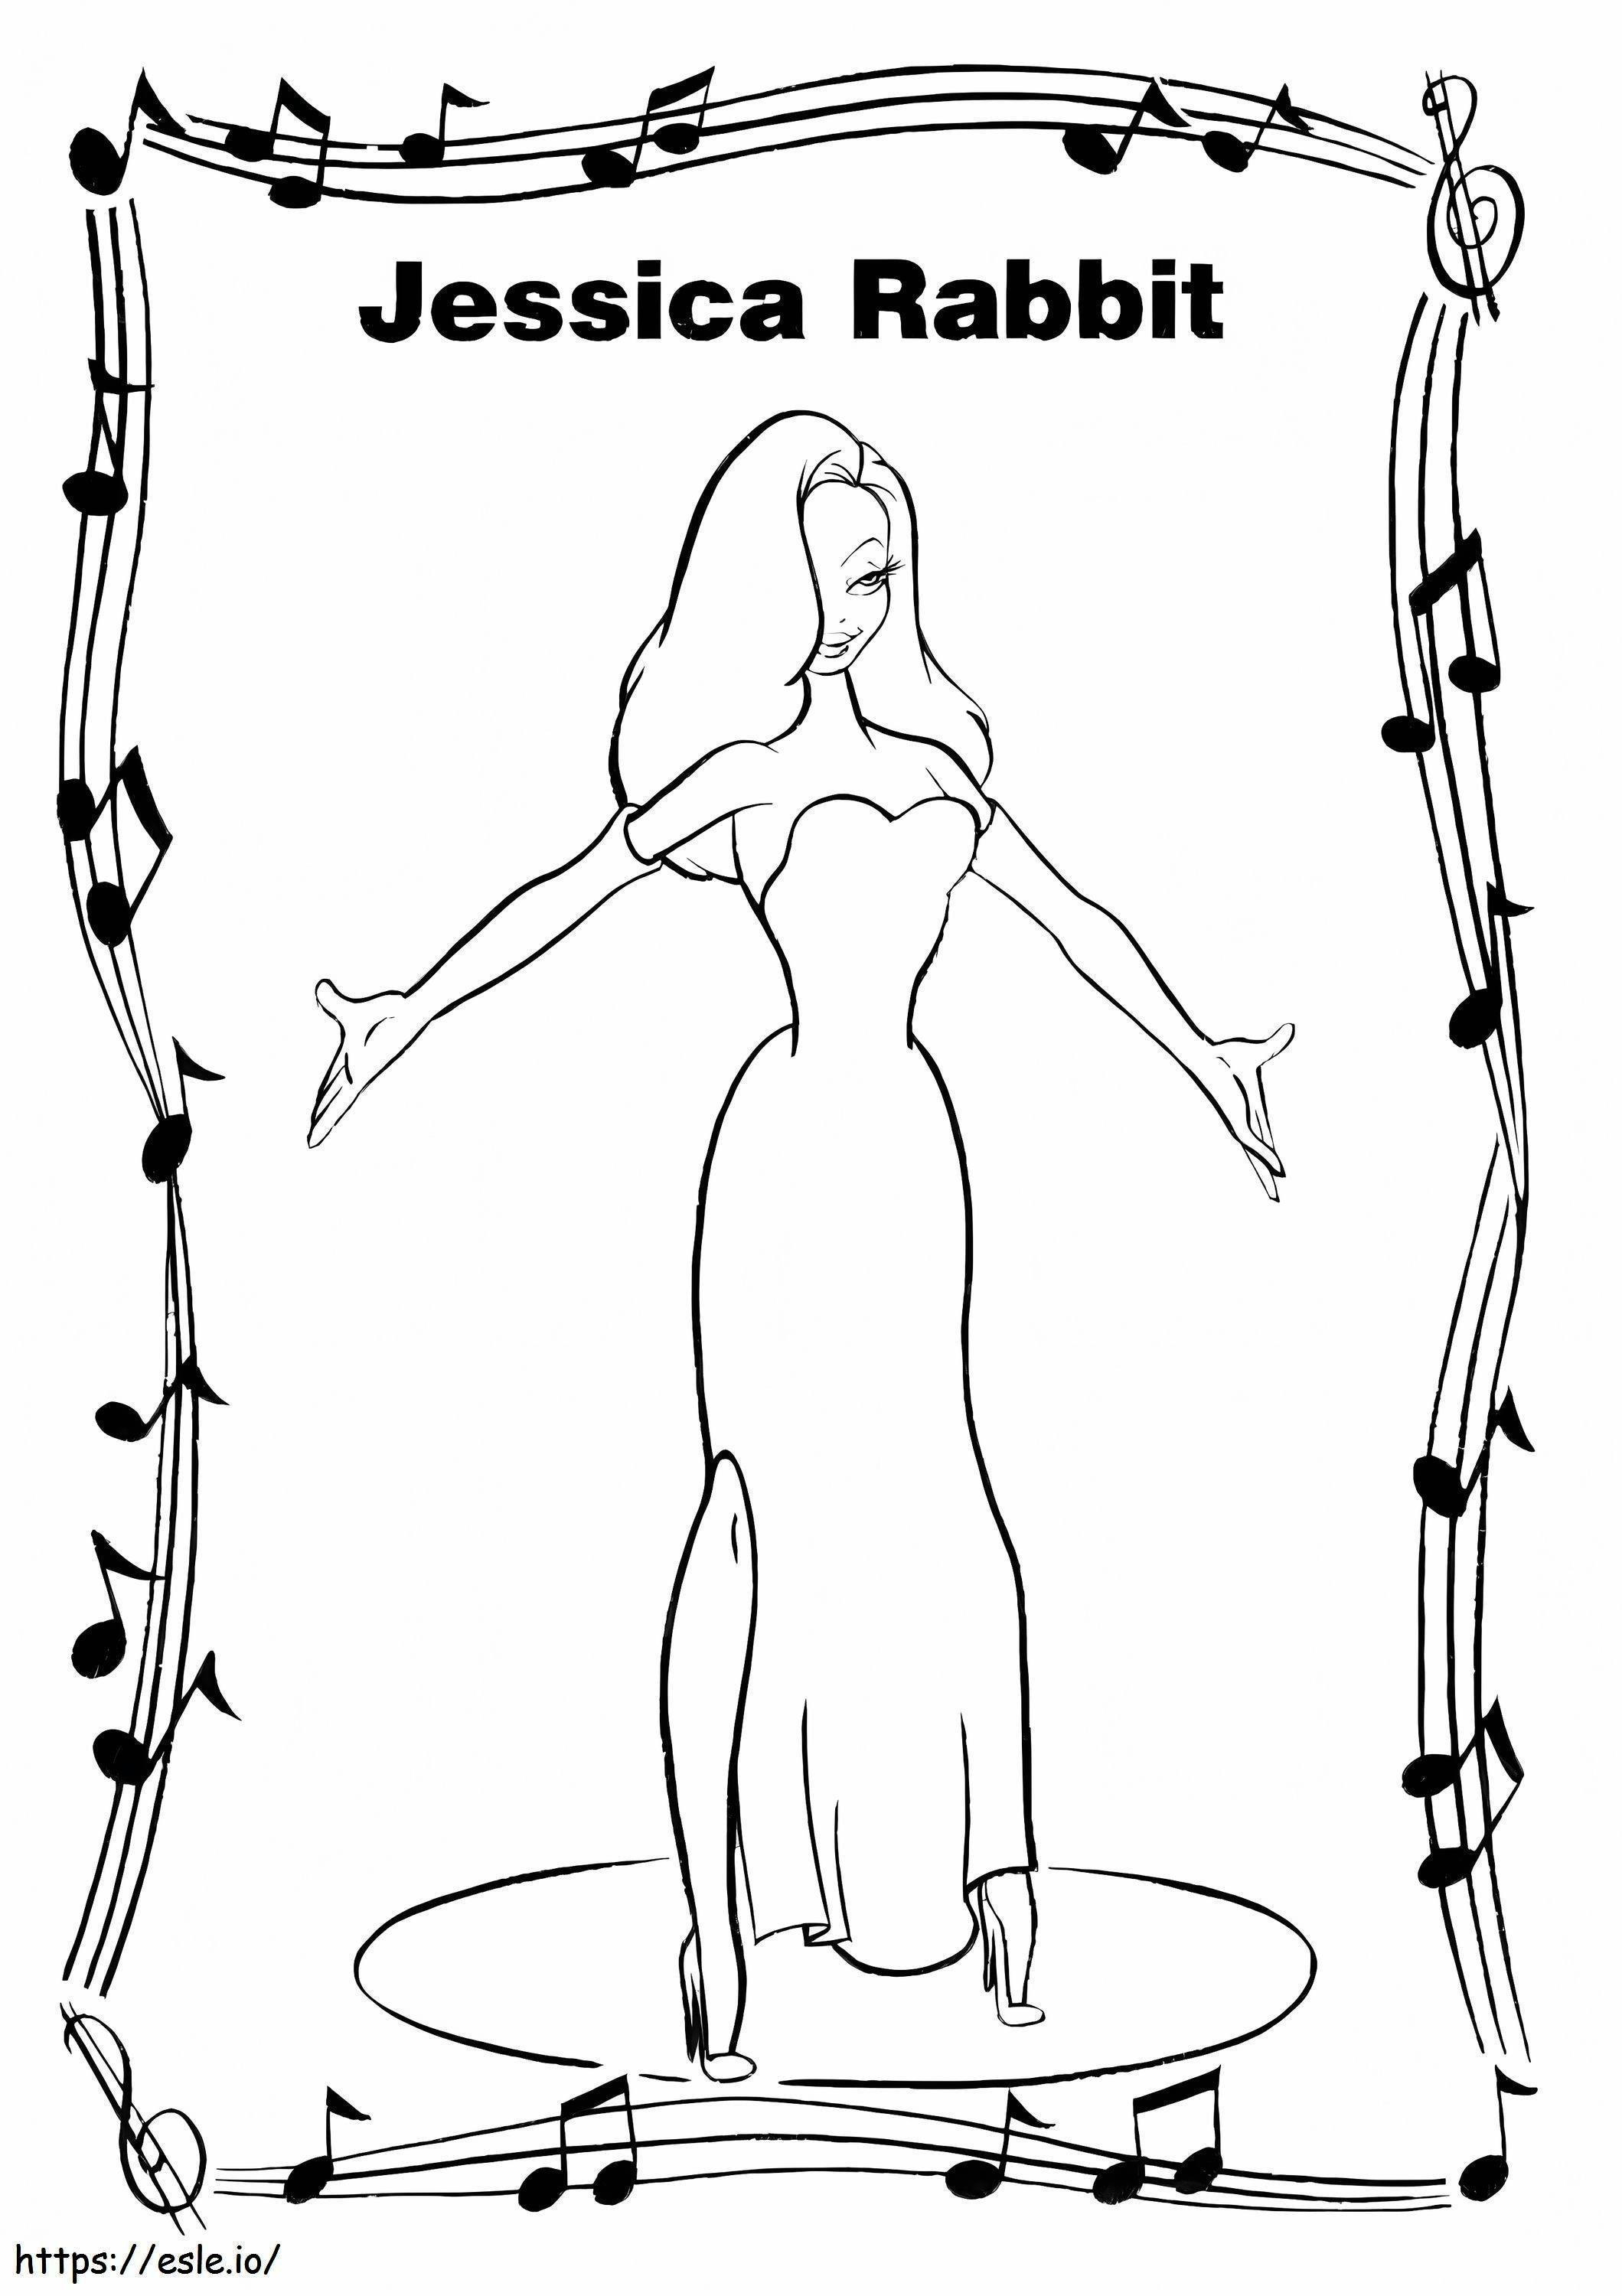 Awesome Jessica Rabbit coloring page